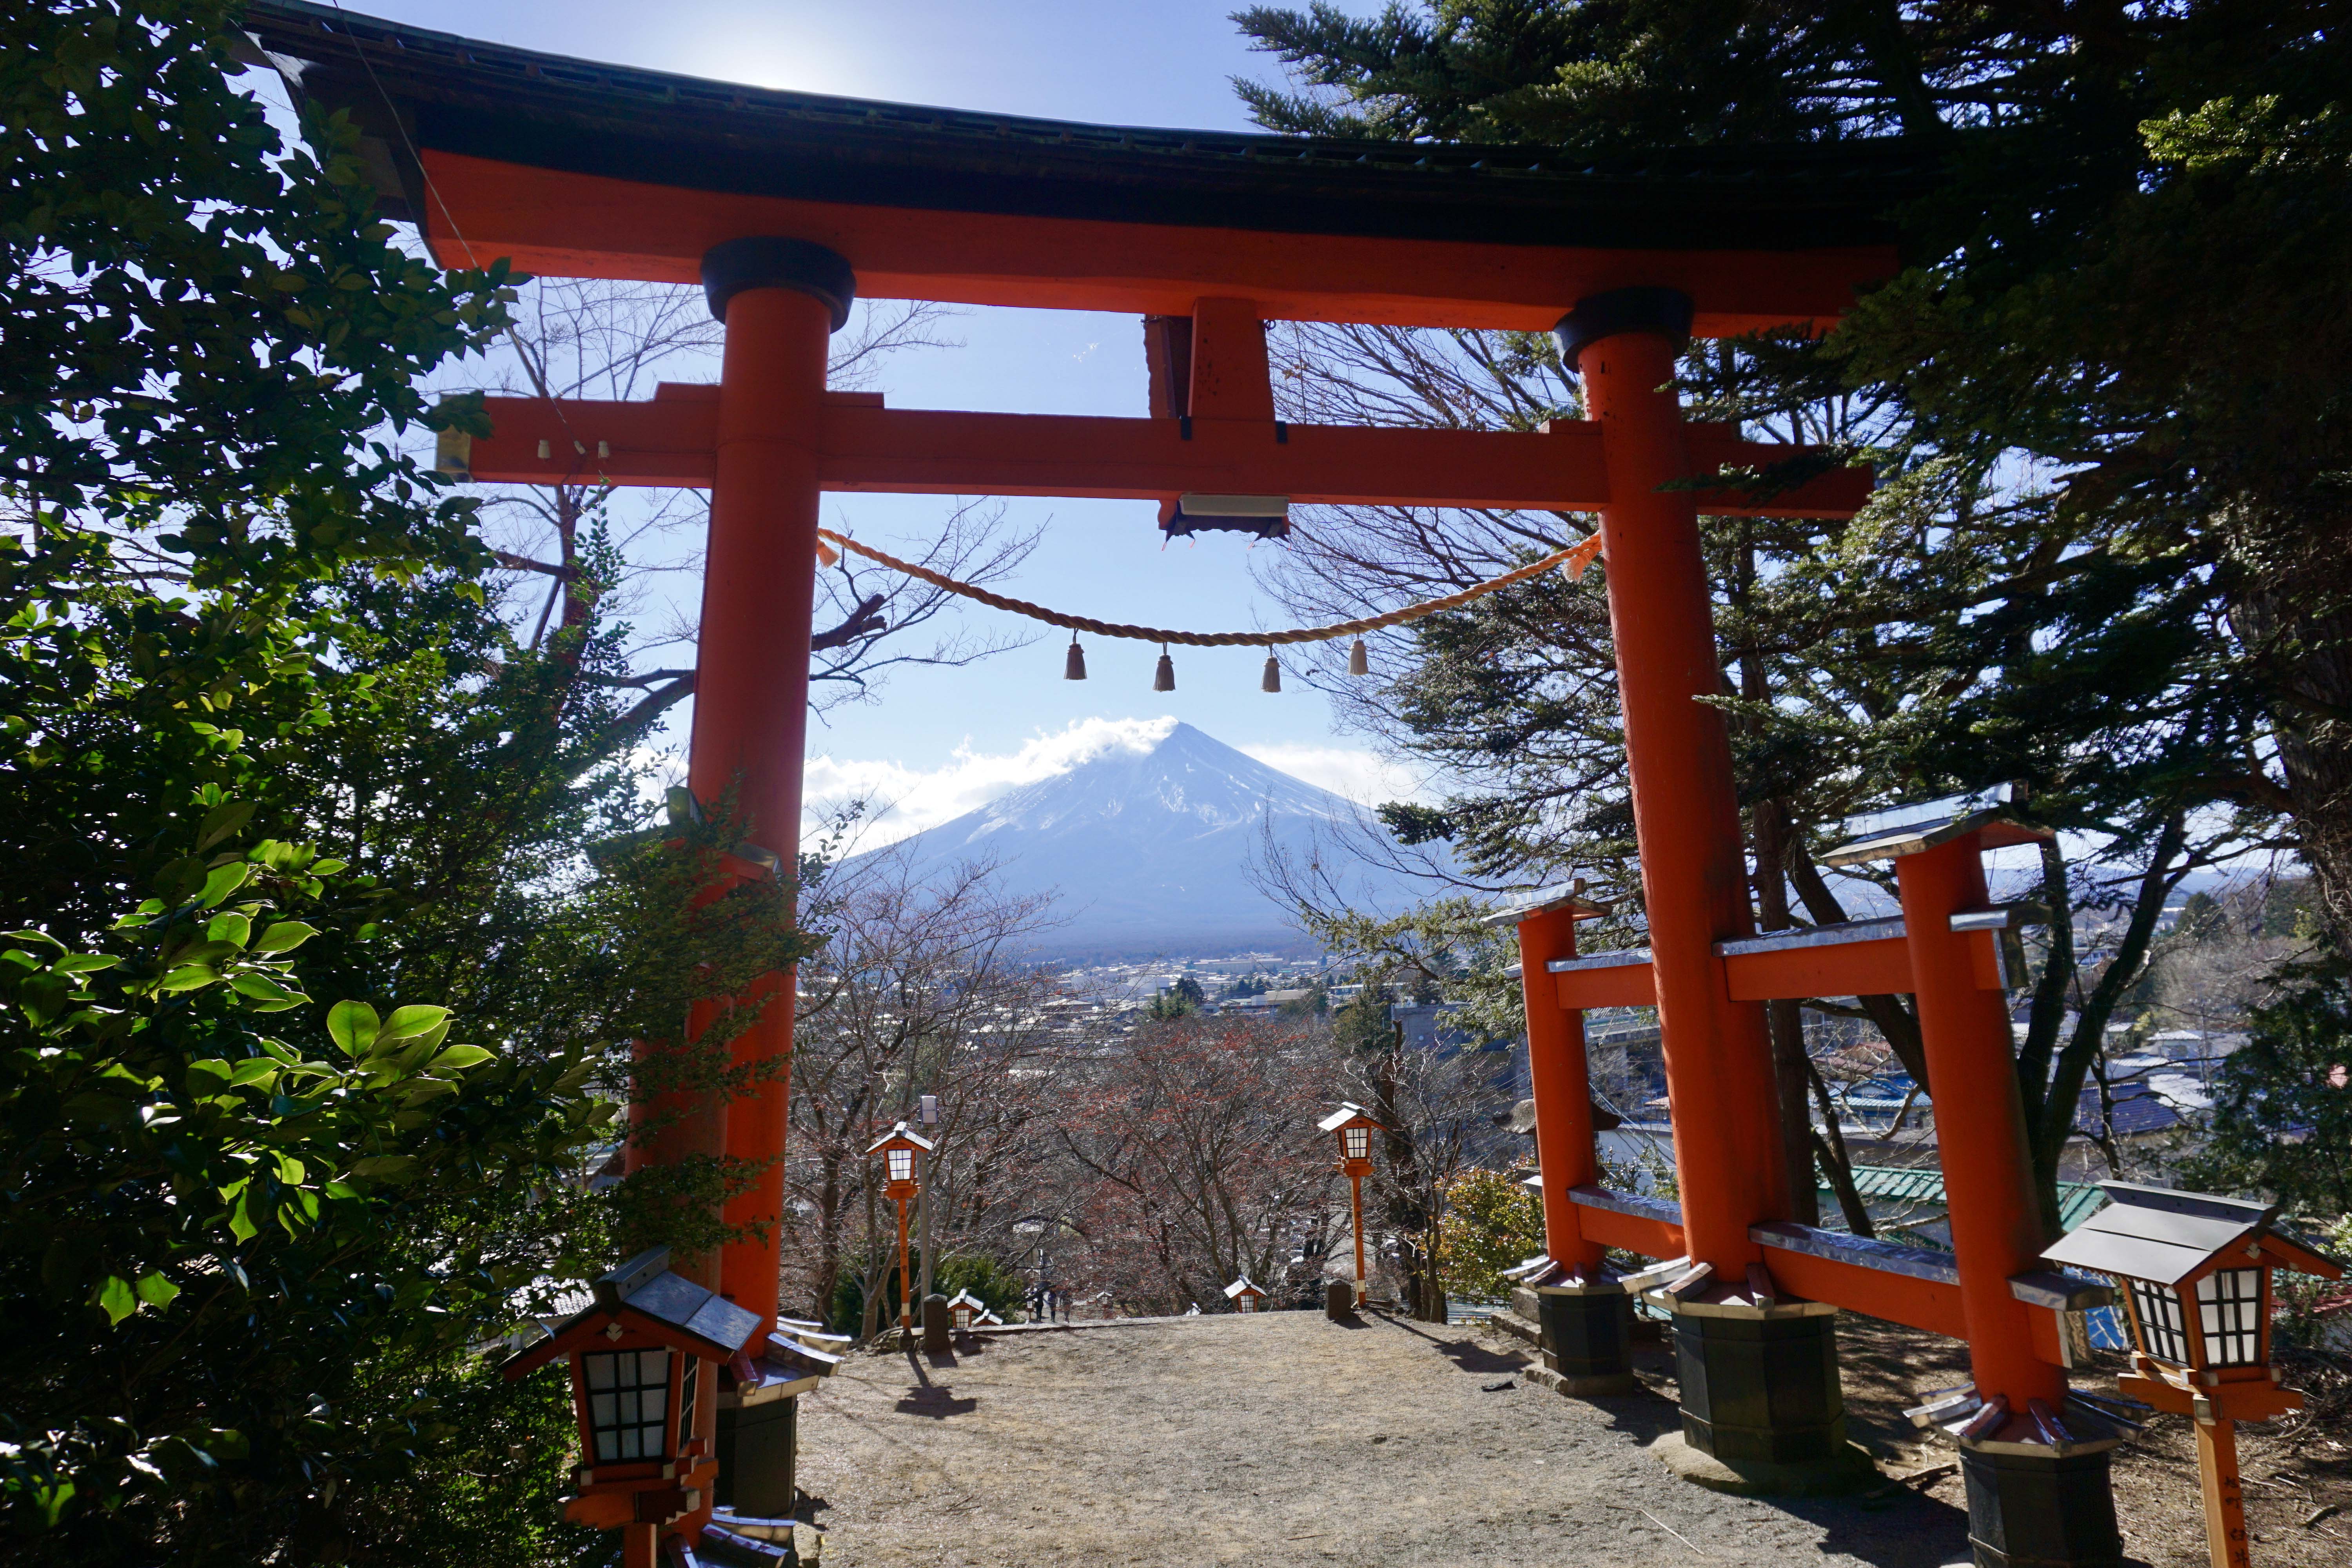 10 Best Places to see Mt Fuji